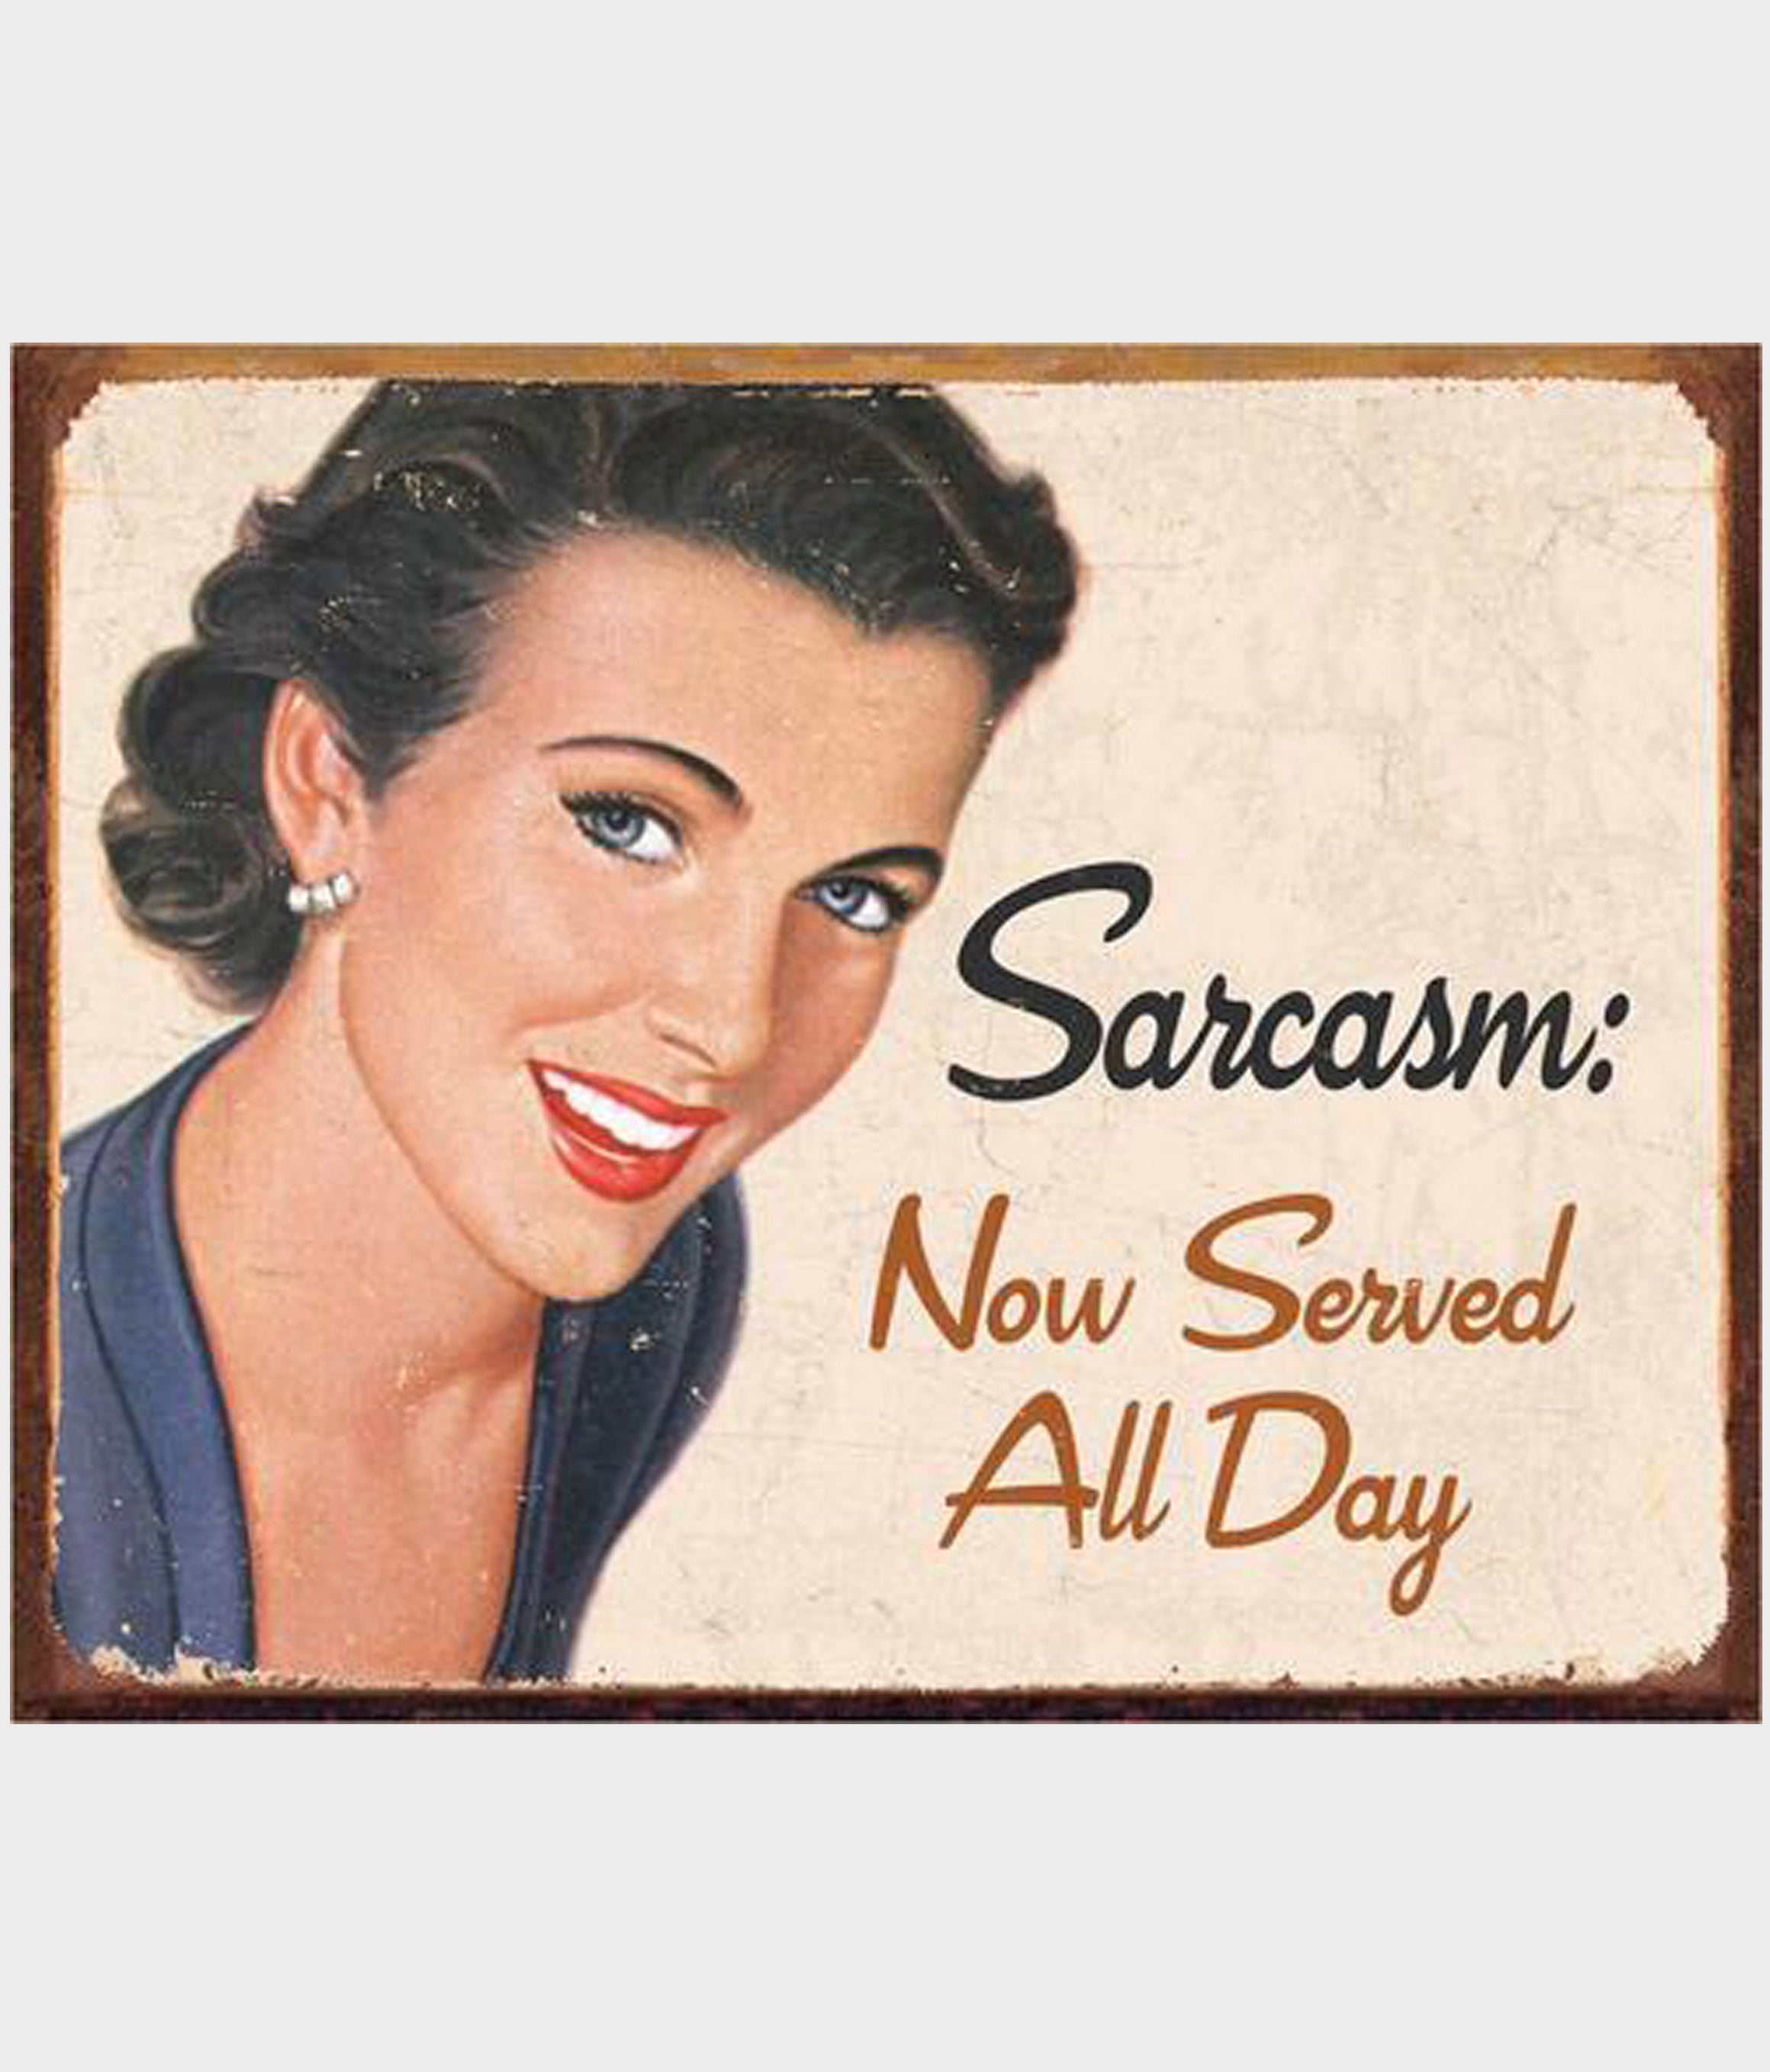 Sarcasm now served all day tin sign